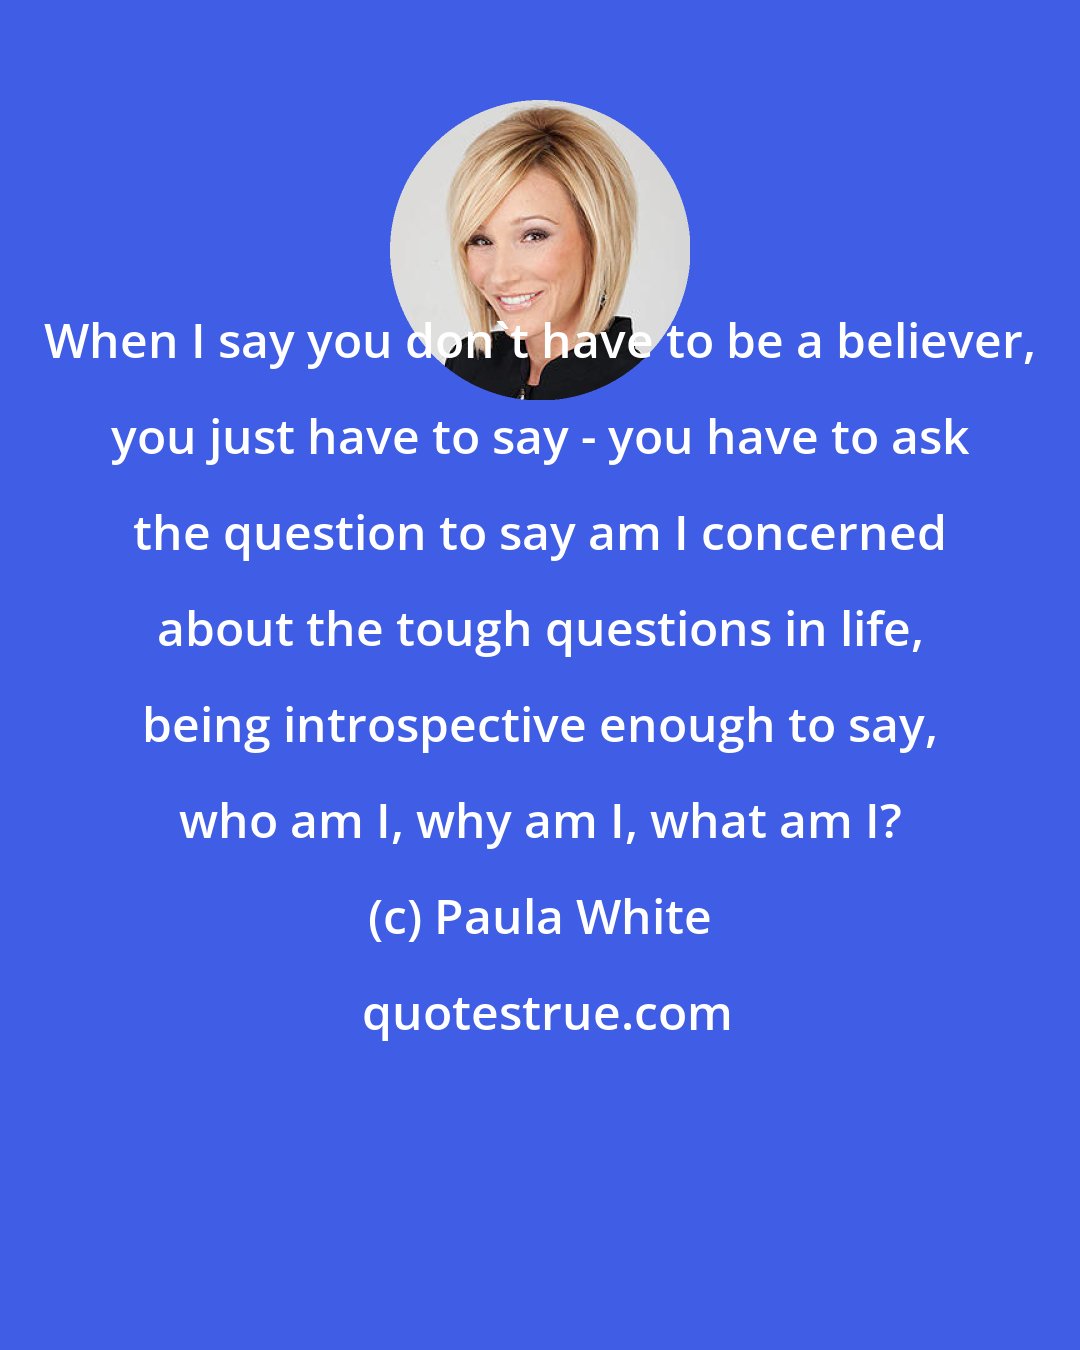 Paula White: When I say you don't have to be a believer, you just have to say - you have to ask the question to say am I concerned about the tough questions in life, being introspective enough to say, who am I, why am I, what am I?